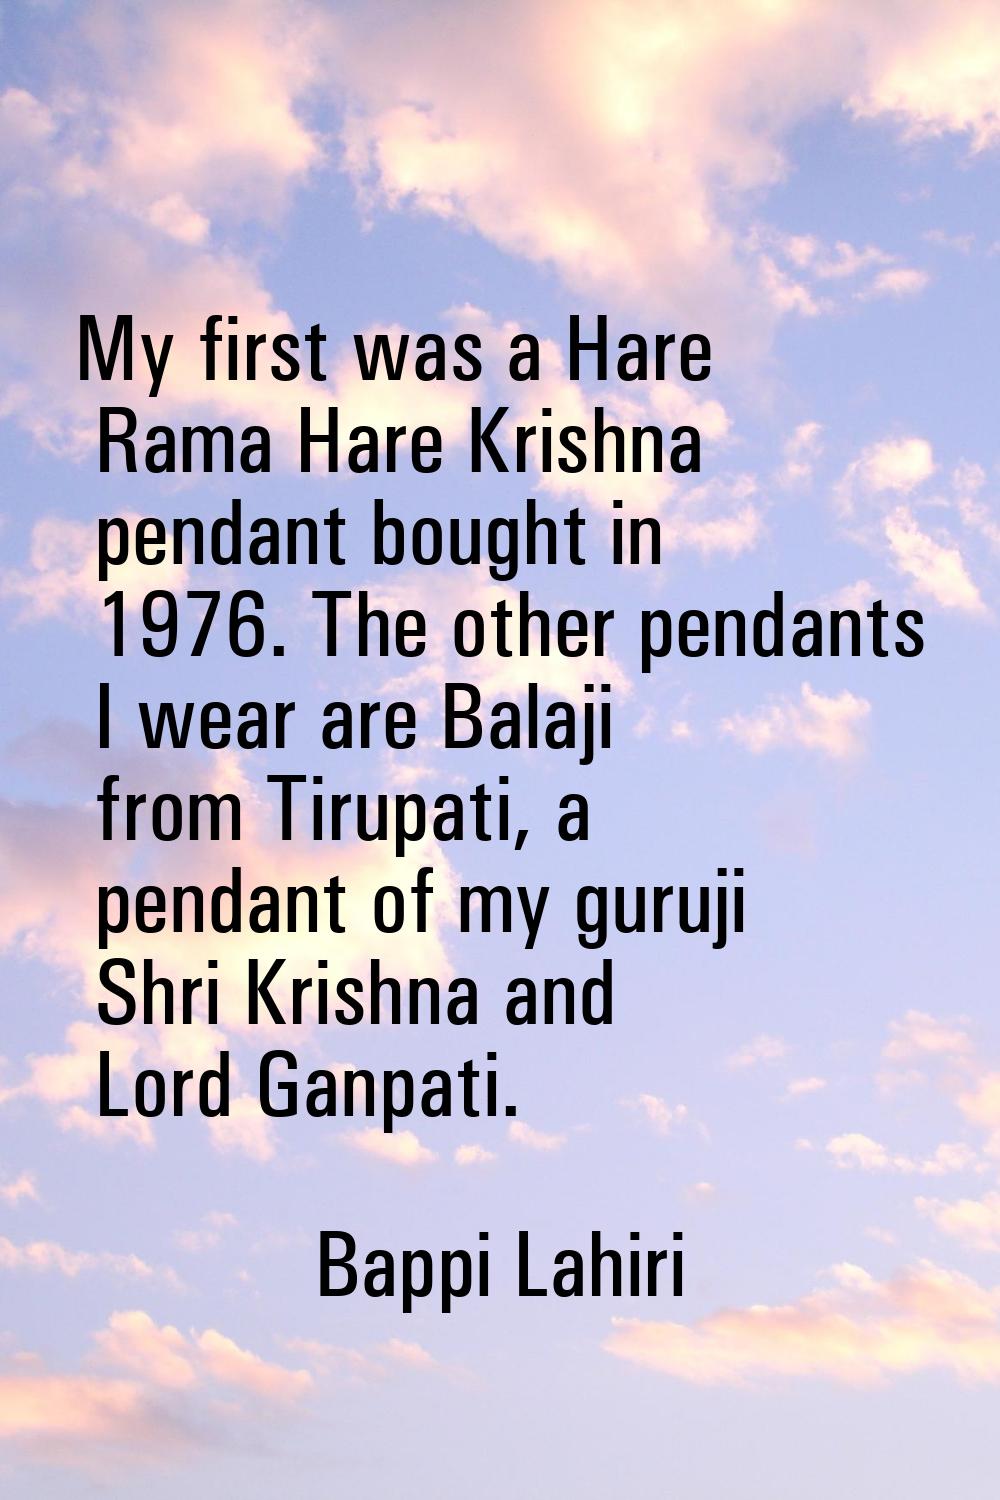 My first was a Hare Rama Hare Krishna pendant bought in 1976. The other pendants I wear are Balaji 